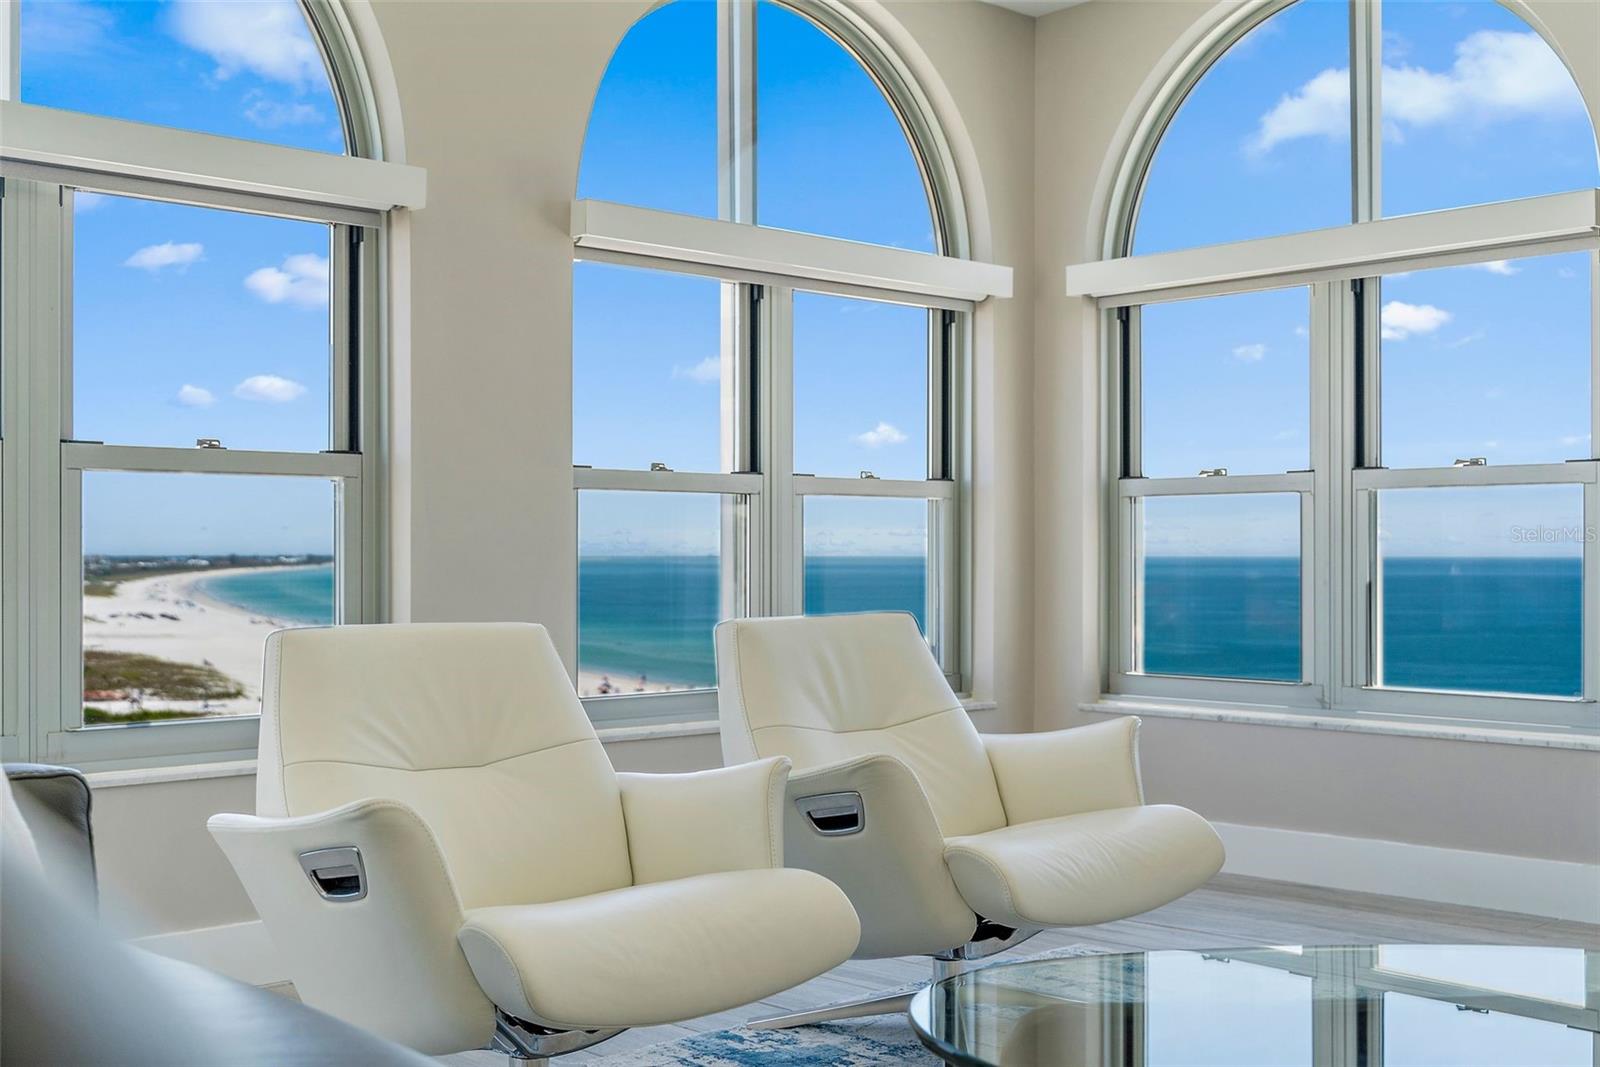 Enjoy incredible views right from the comfort of your living room